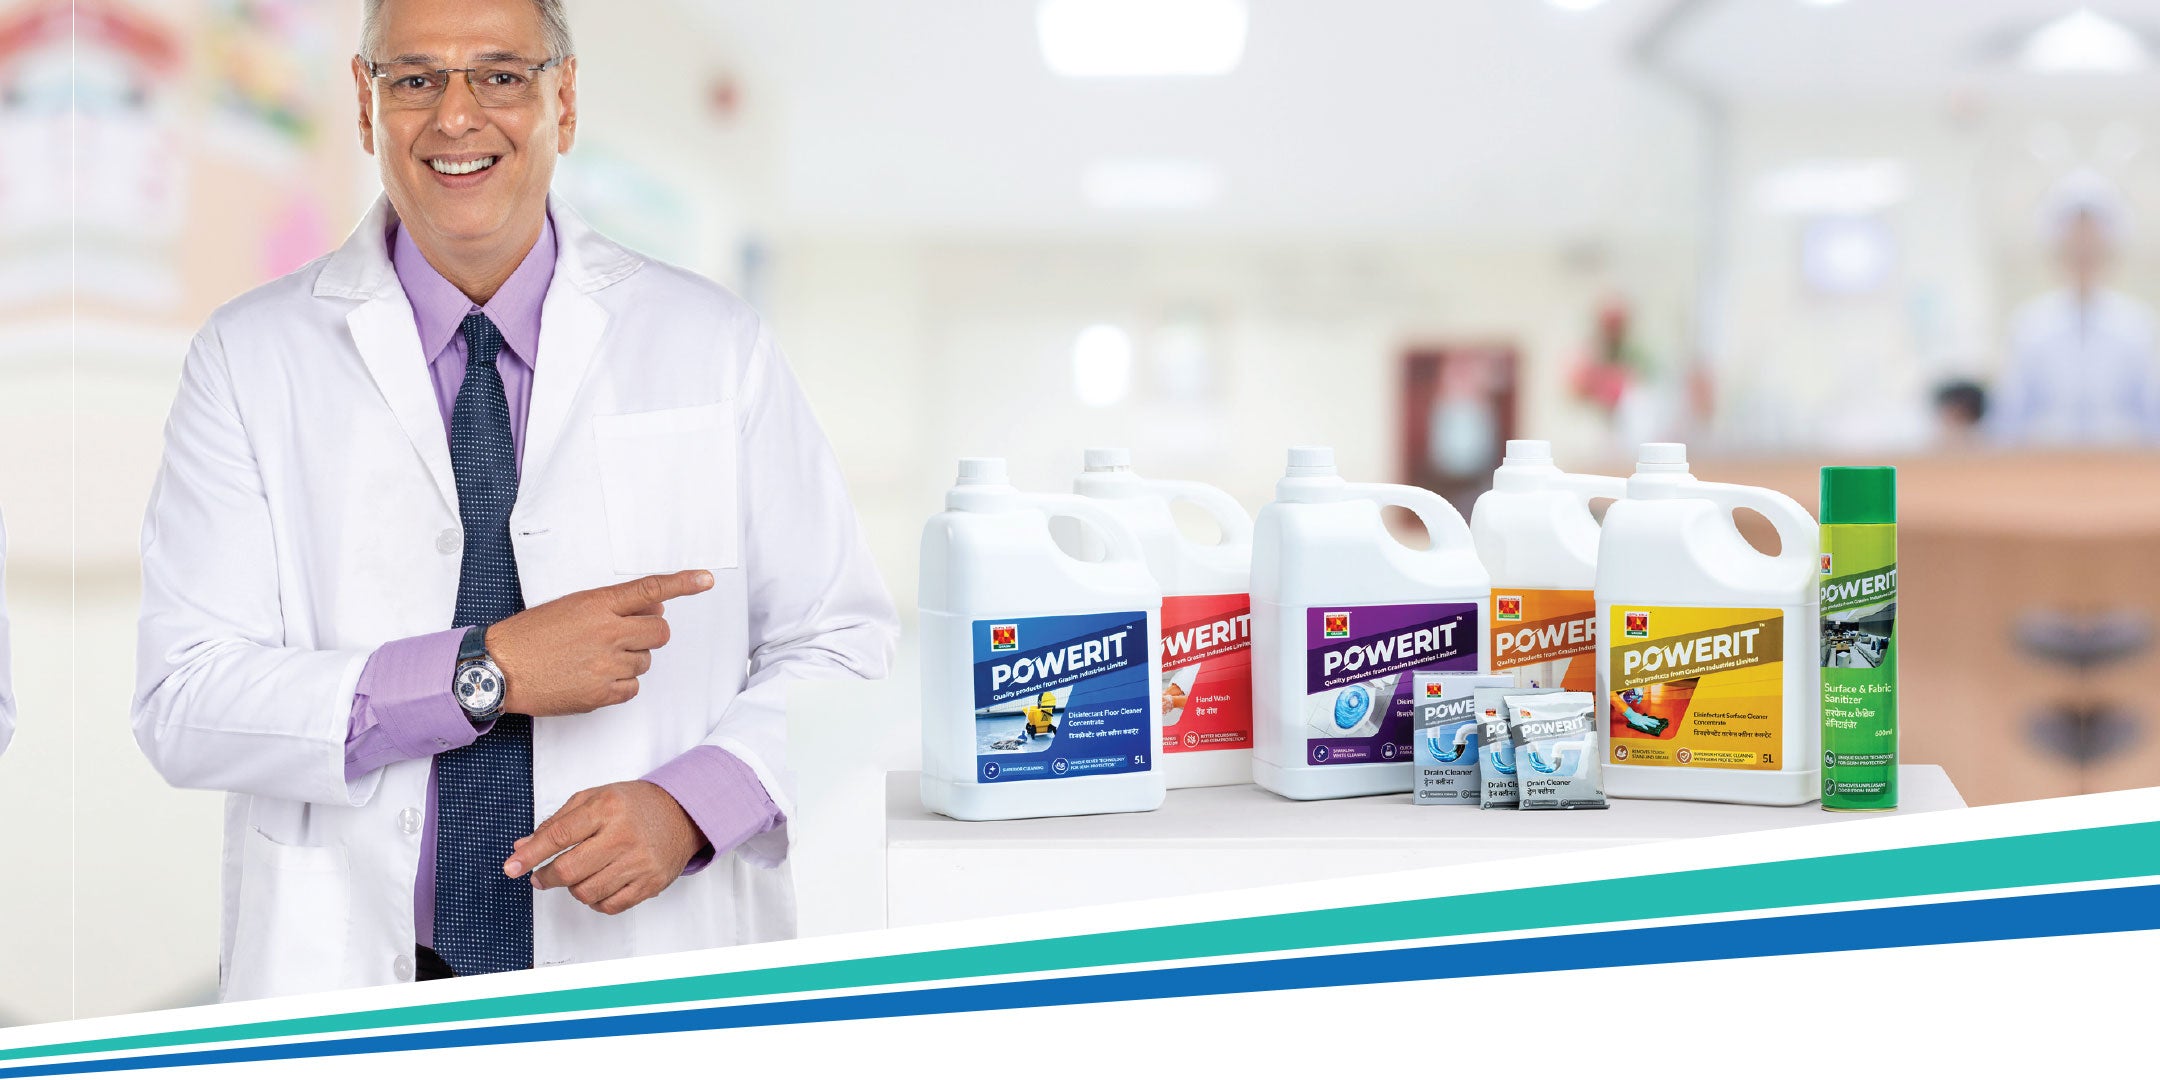 Powerit disinfection and cleaning chemicals range endorsed by experts